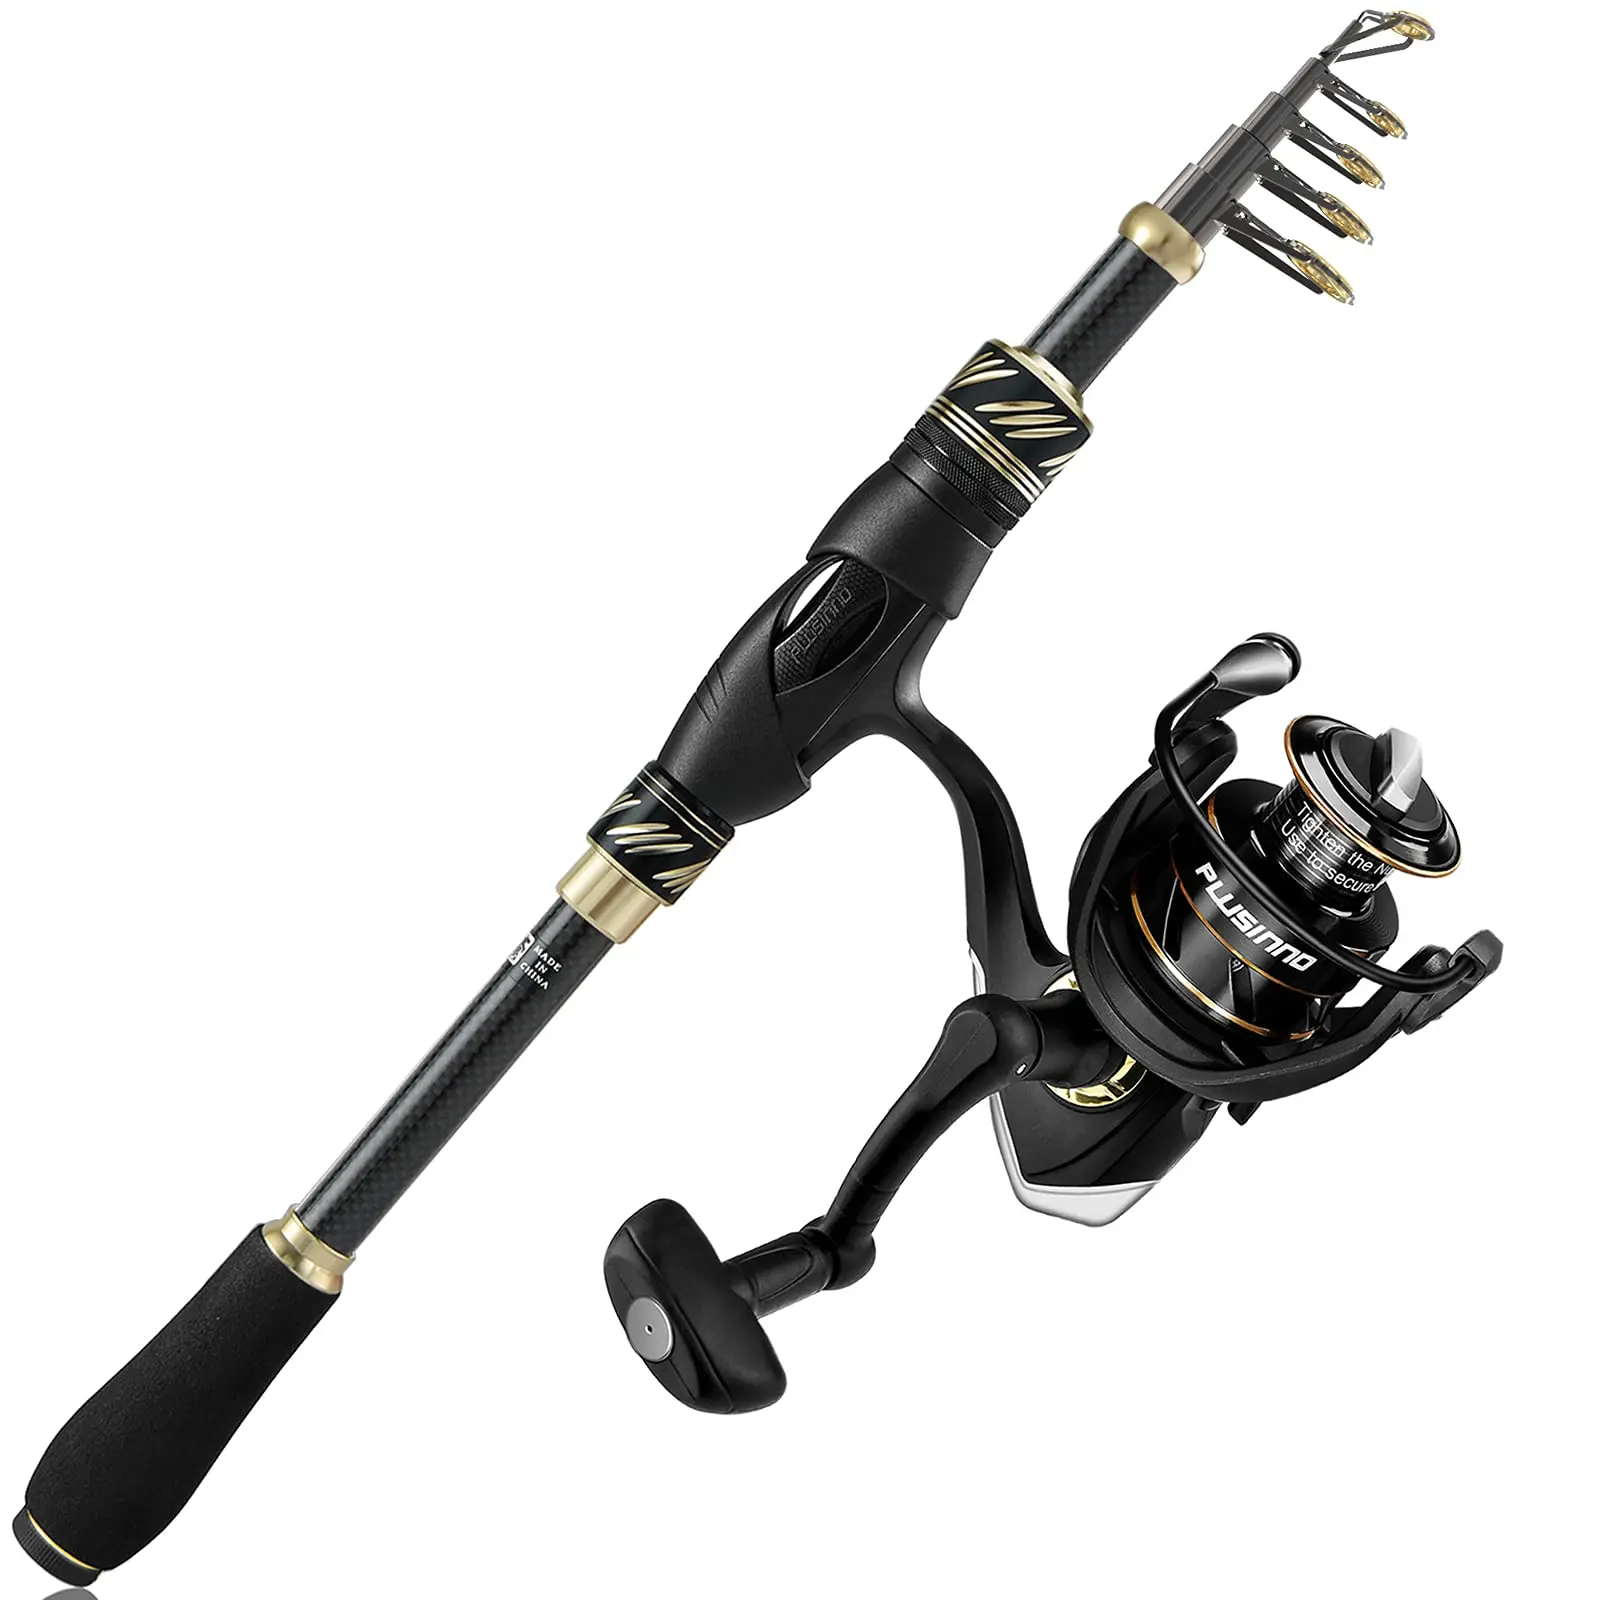  moisture Reel and Fishing Rod Combo Ultralight Carbon